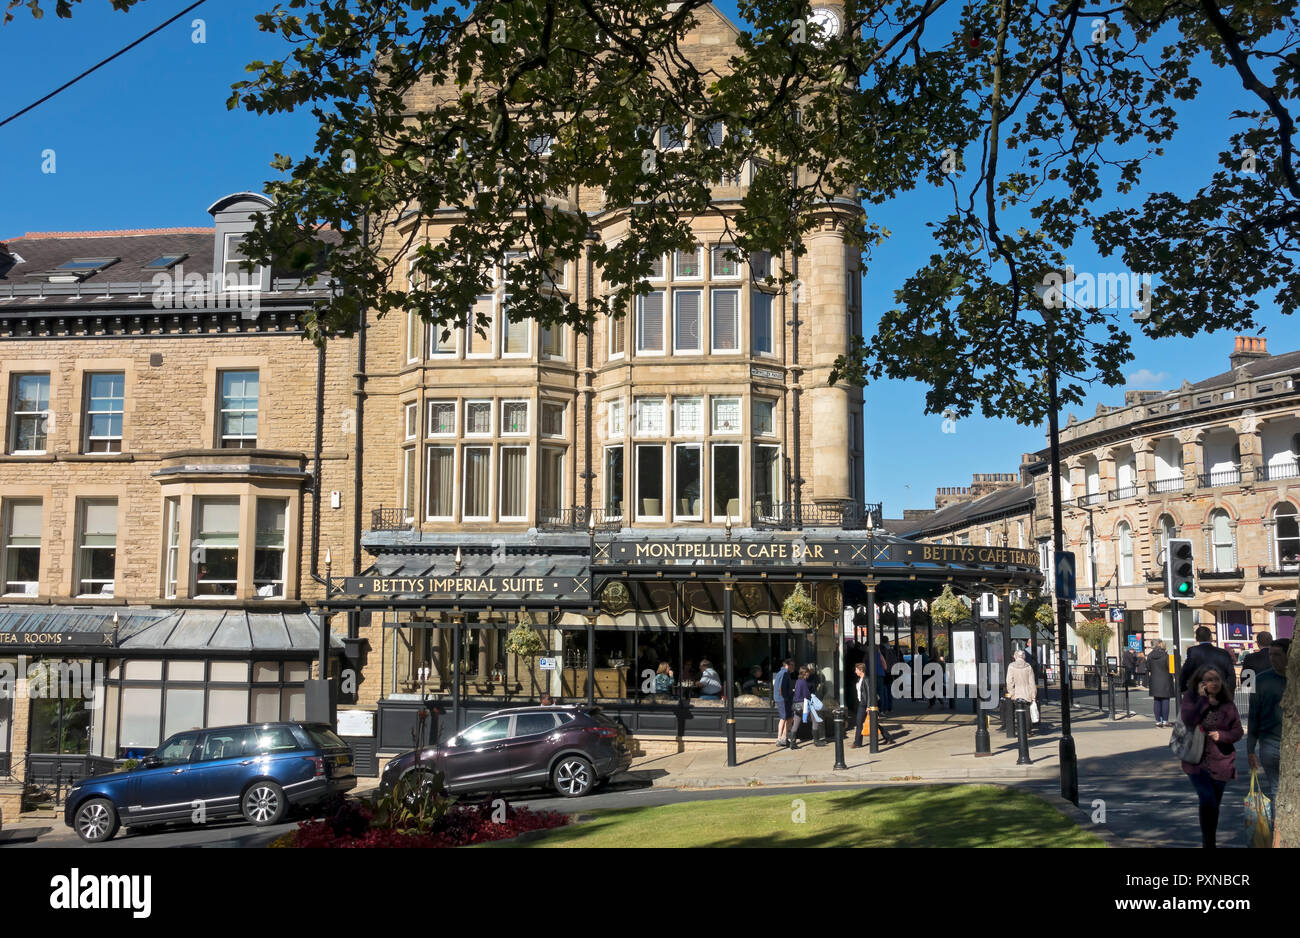 Bettys cafe and tea room rooms in late summer Montpellier Parade Harrogate North Yorkshire England UK United Kingdom GB Great Britain Stock Photo